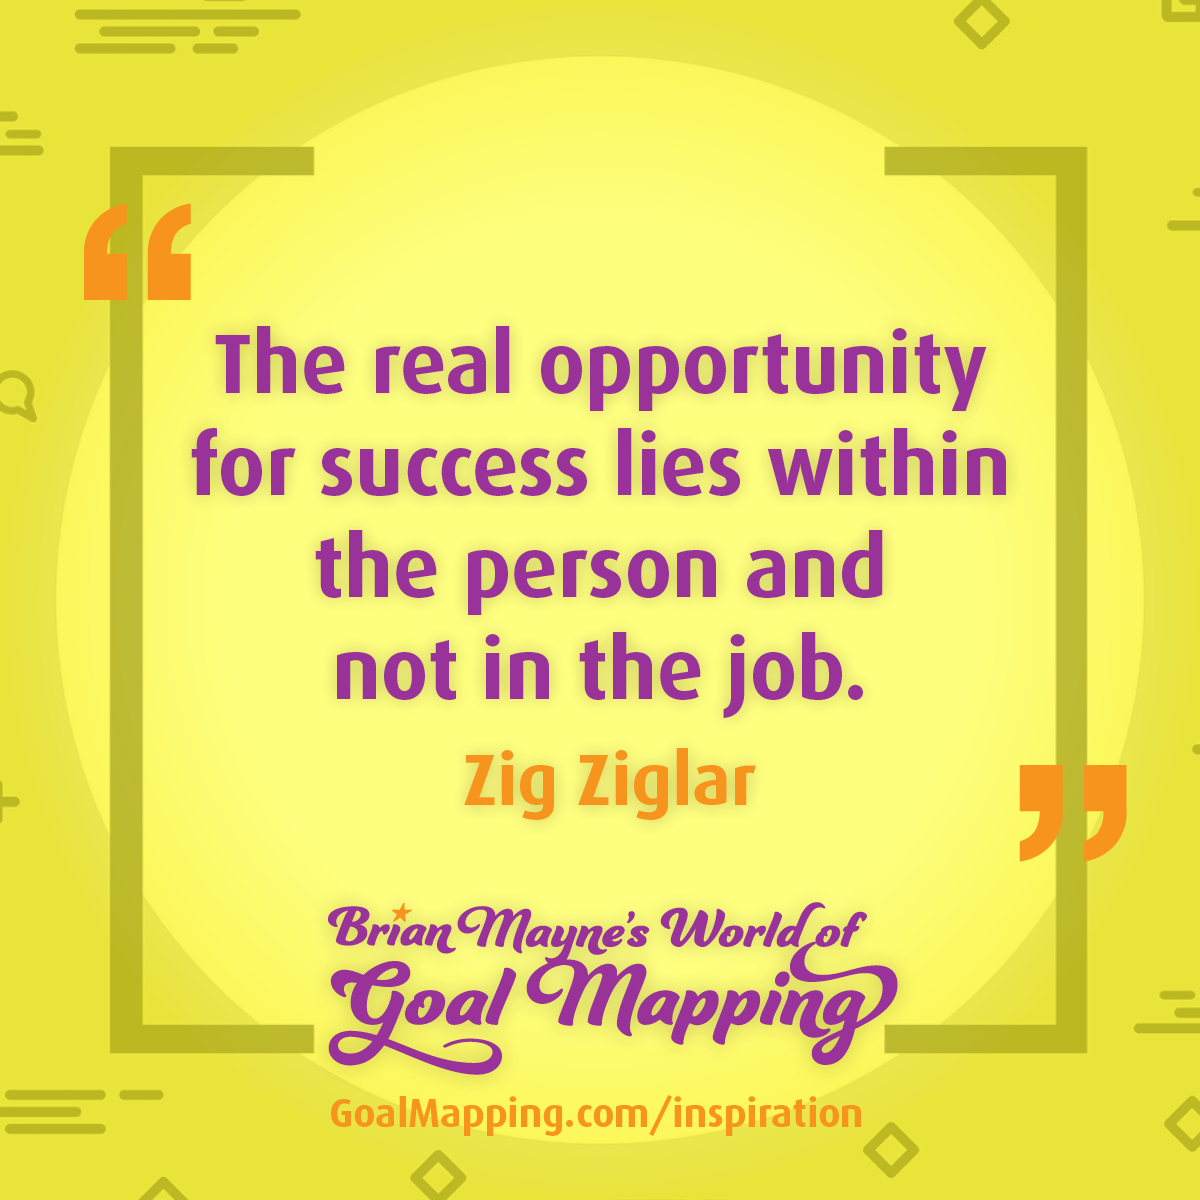 "The real opportunity for success lies within the person and not in the job."  Zig Ziglar